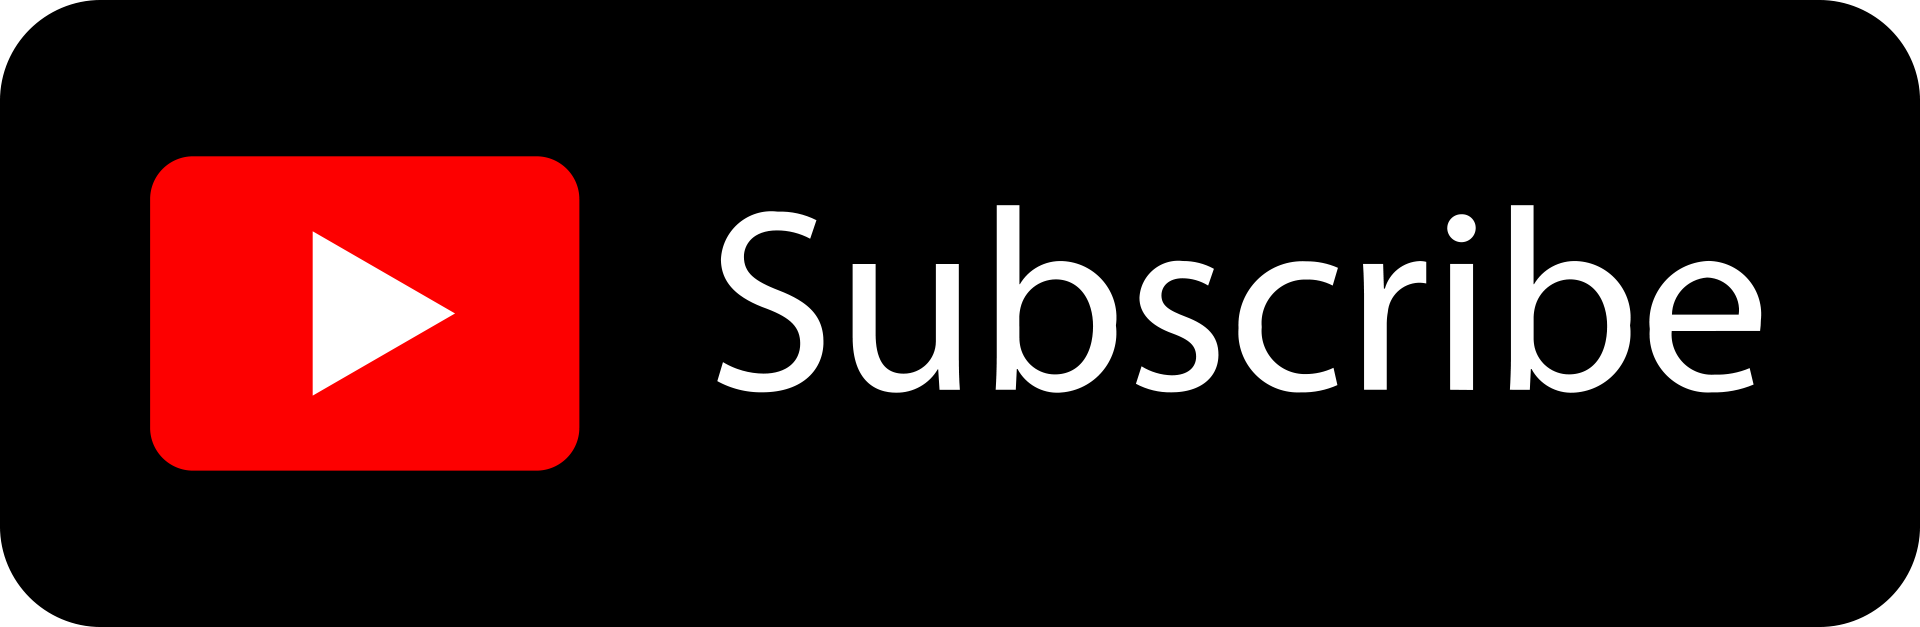 Free-Black-YouTube-Subscribe-Button-Icon-By-AlfredoCreates